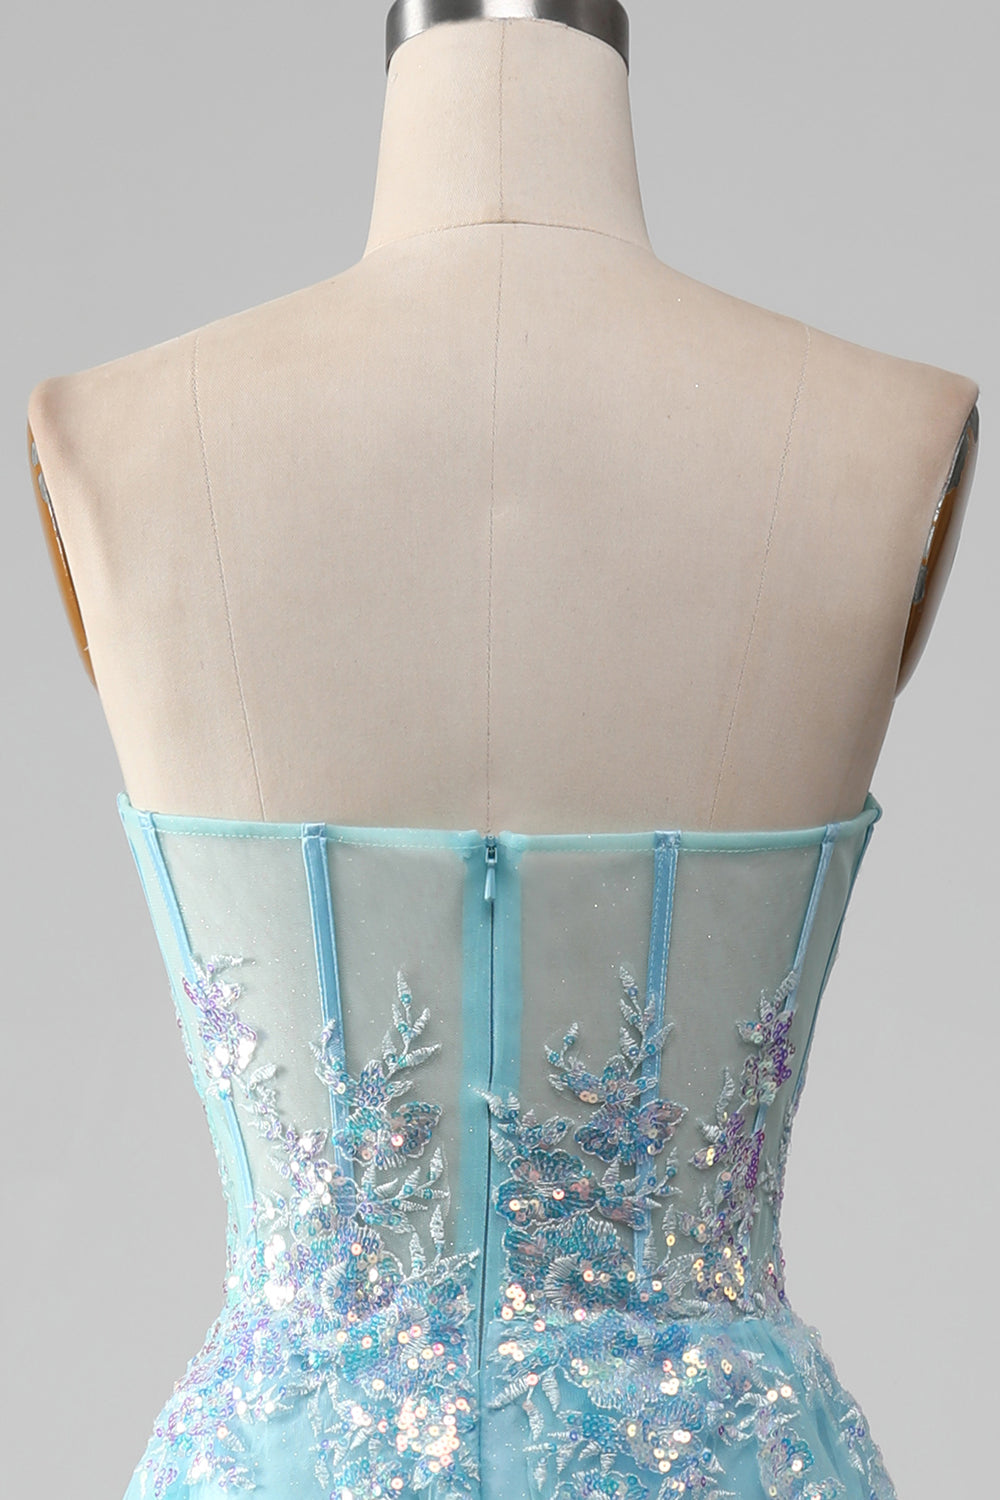 Sky Blue A-Line Sweetheart Sparkly Sequin Corset Prom Dress with Appliques